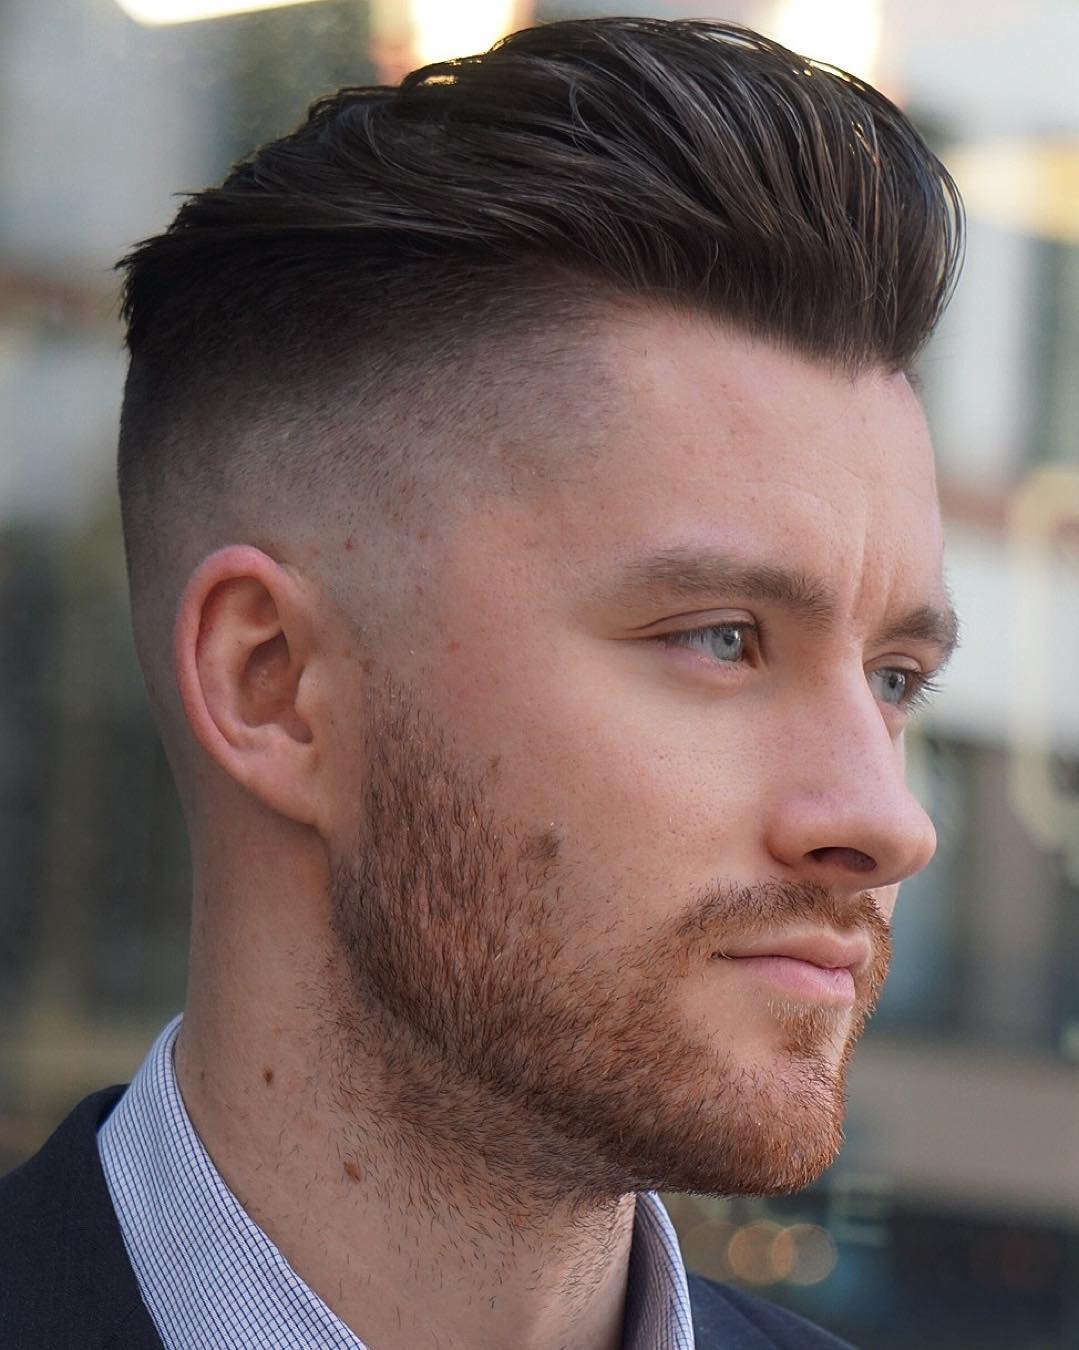 Undercut Hairstyle Mens
 50 Stylish Undercut Hairstyle Variations to copy in 2019